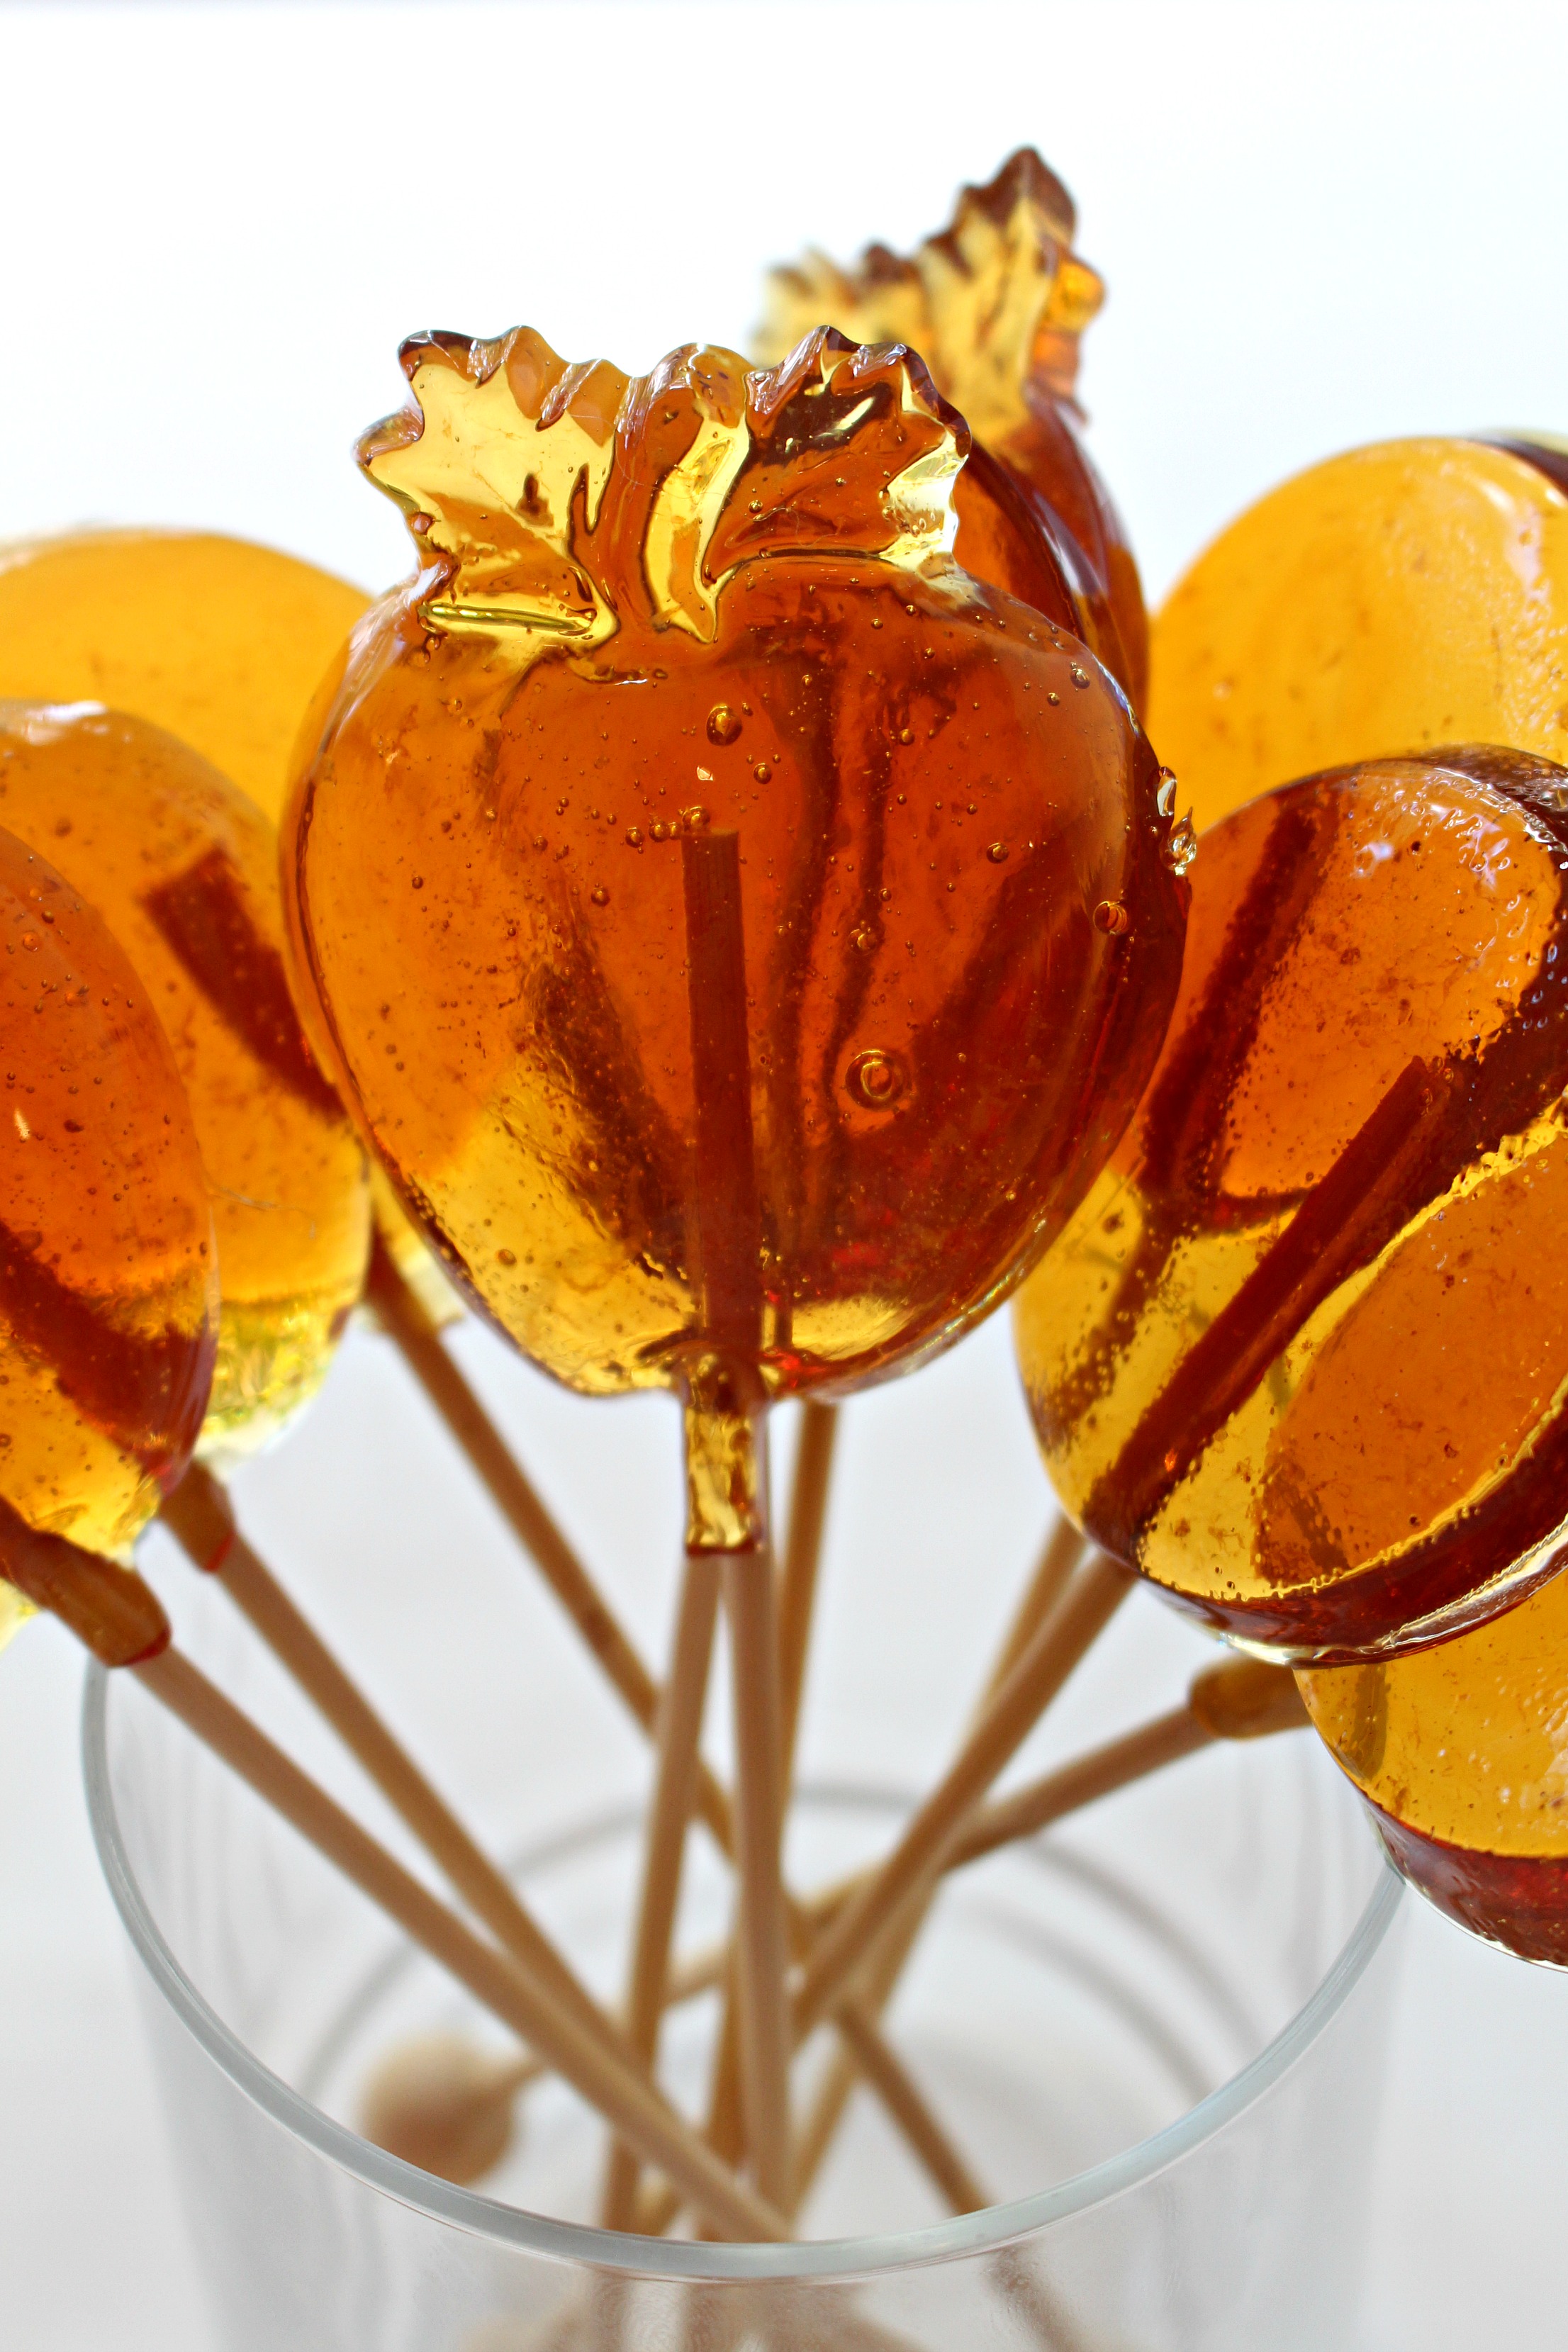 Amber colored Honey Lolipops molded in circle shapes and apple shape with wooden sticks.